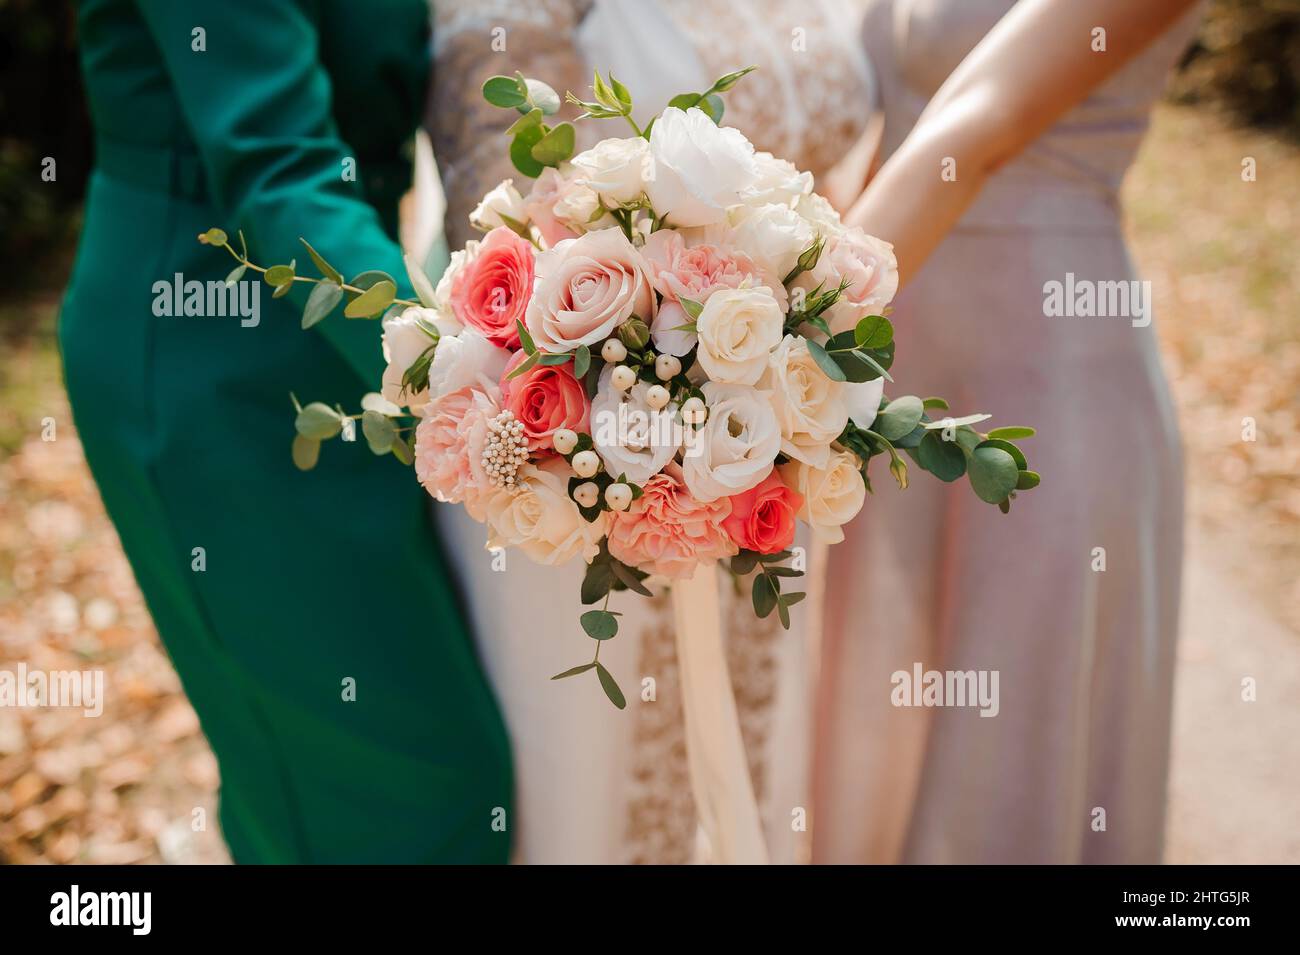 Wedding bouquet in the hands of the bride. Bridal bouquet Stock Photo